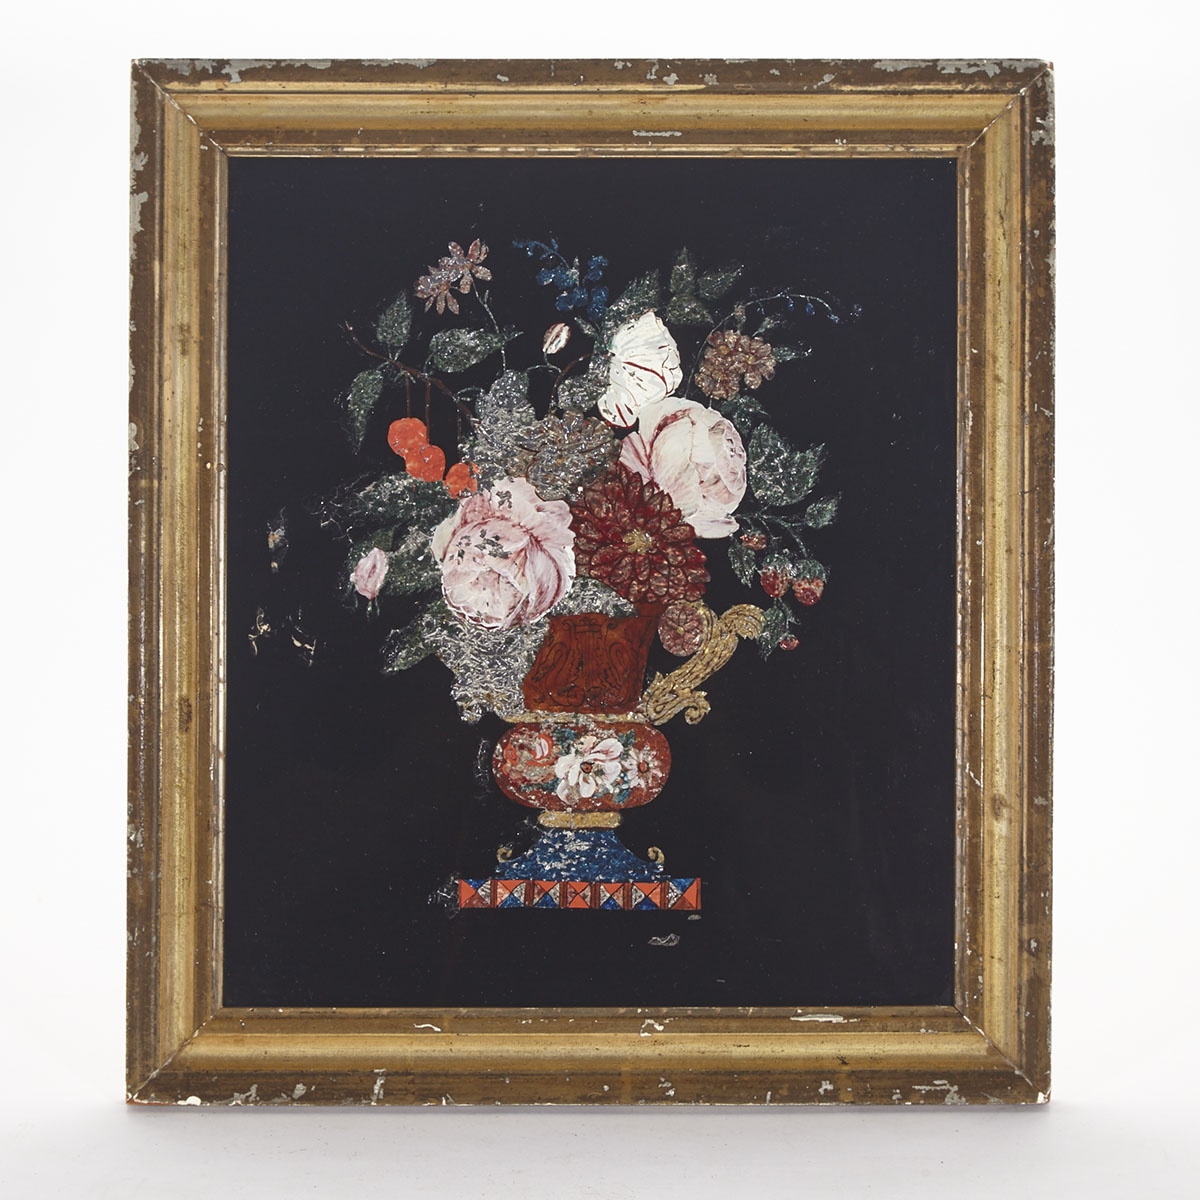 Victorian Tinsel Back Reverse Painting on Glass, mid 19th century